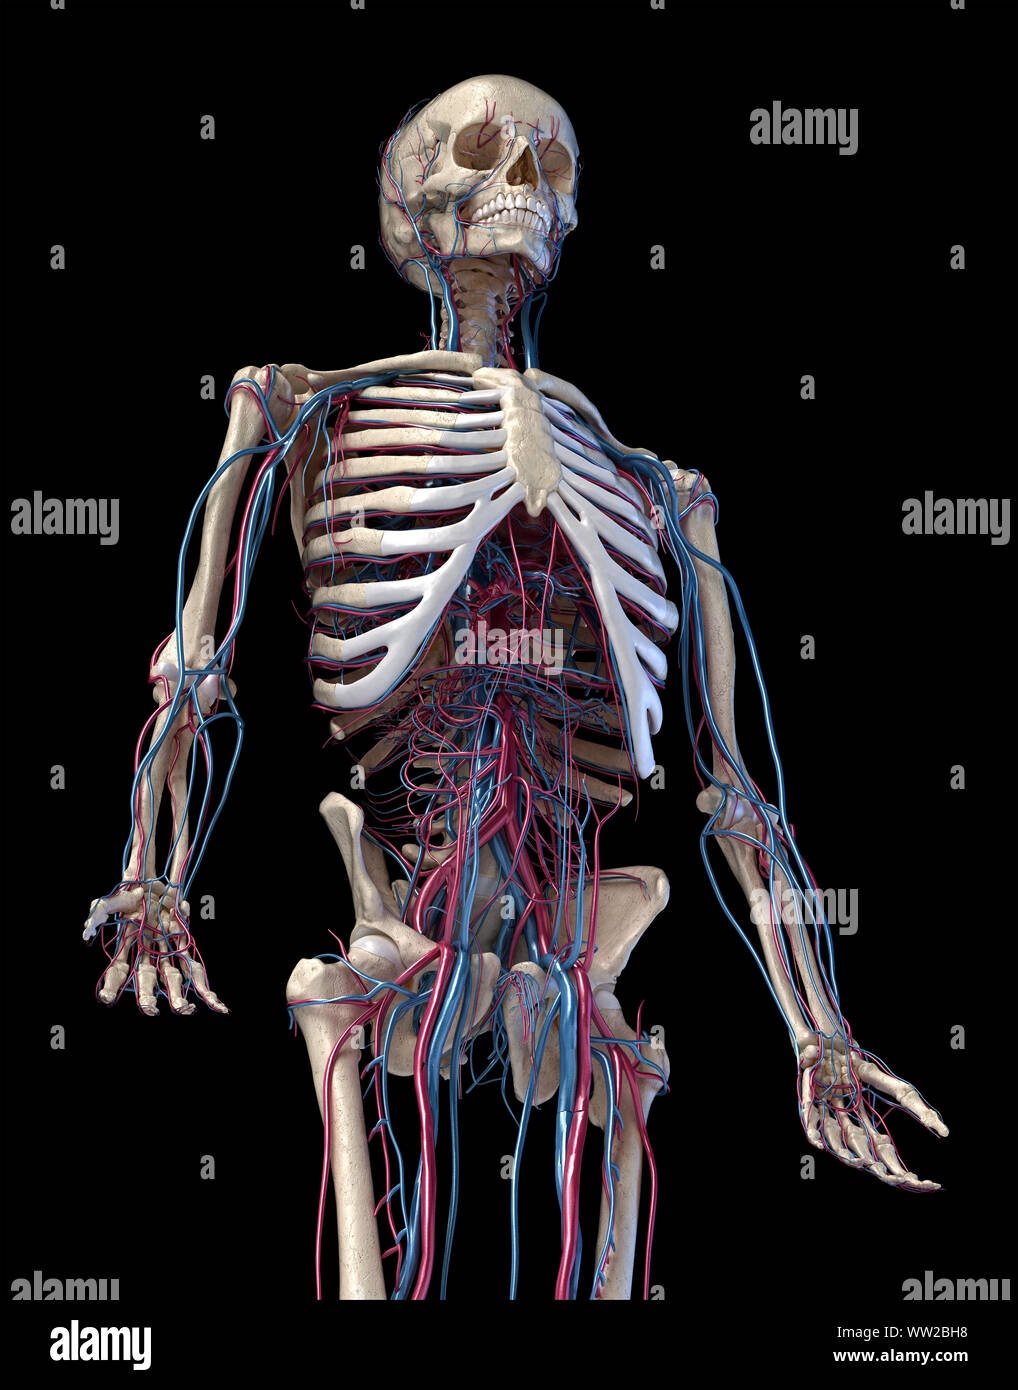 Human anatomy, 3d illustration of the skeleton with cardiovascular system. Perspective view of 3/4 upper part, front side. On black background. Stock Photo